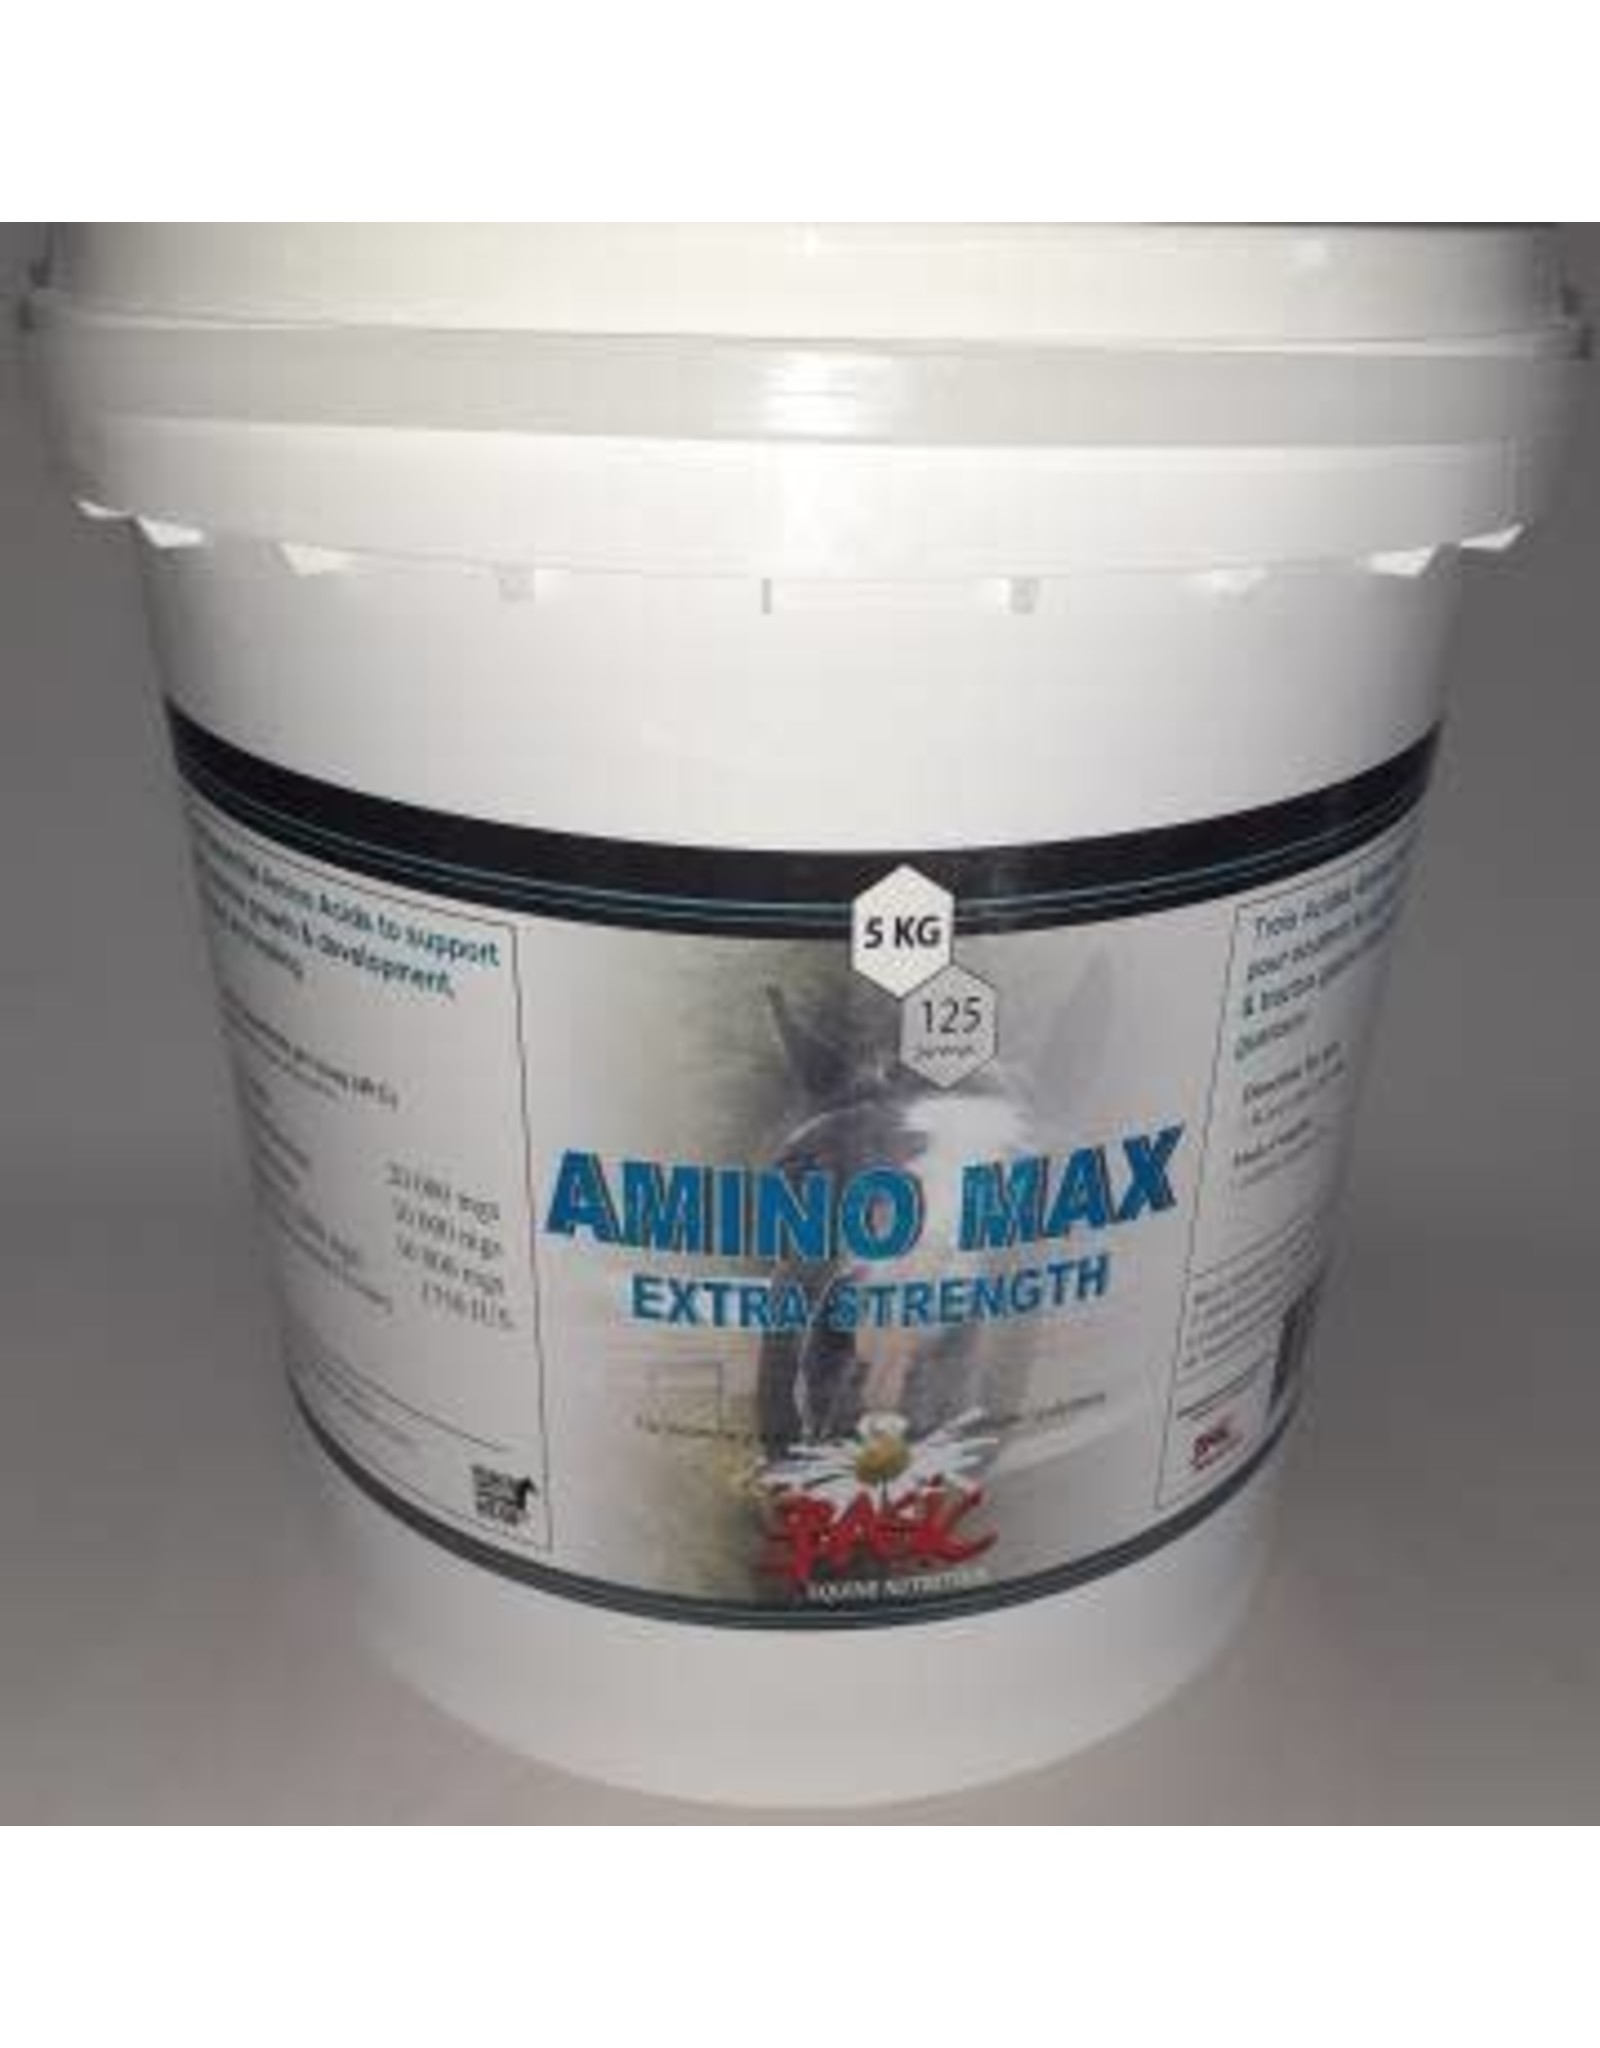 Amino Max Extra Strength *With Natural Vit. E*  *5 Kg 80712 -  Contains three essential Amino Acids to support diet, muscle growth and development, GI tract and healing in horses. L-Lysine 20 grams, DL-Methionine 10 grams, L-Threonine 5 grams & Vitami